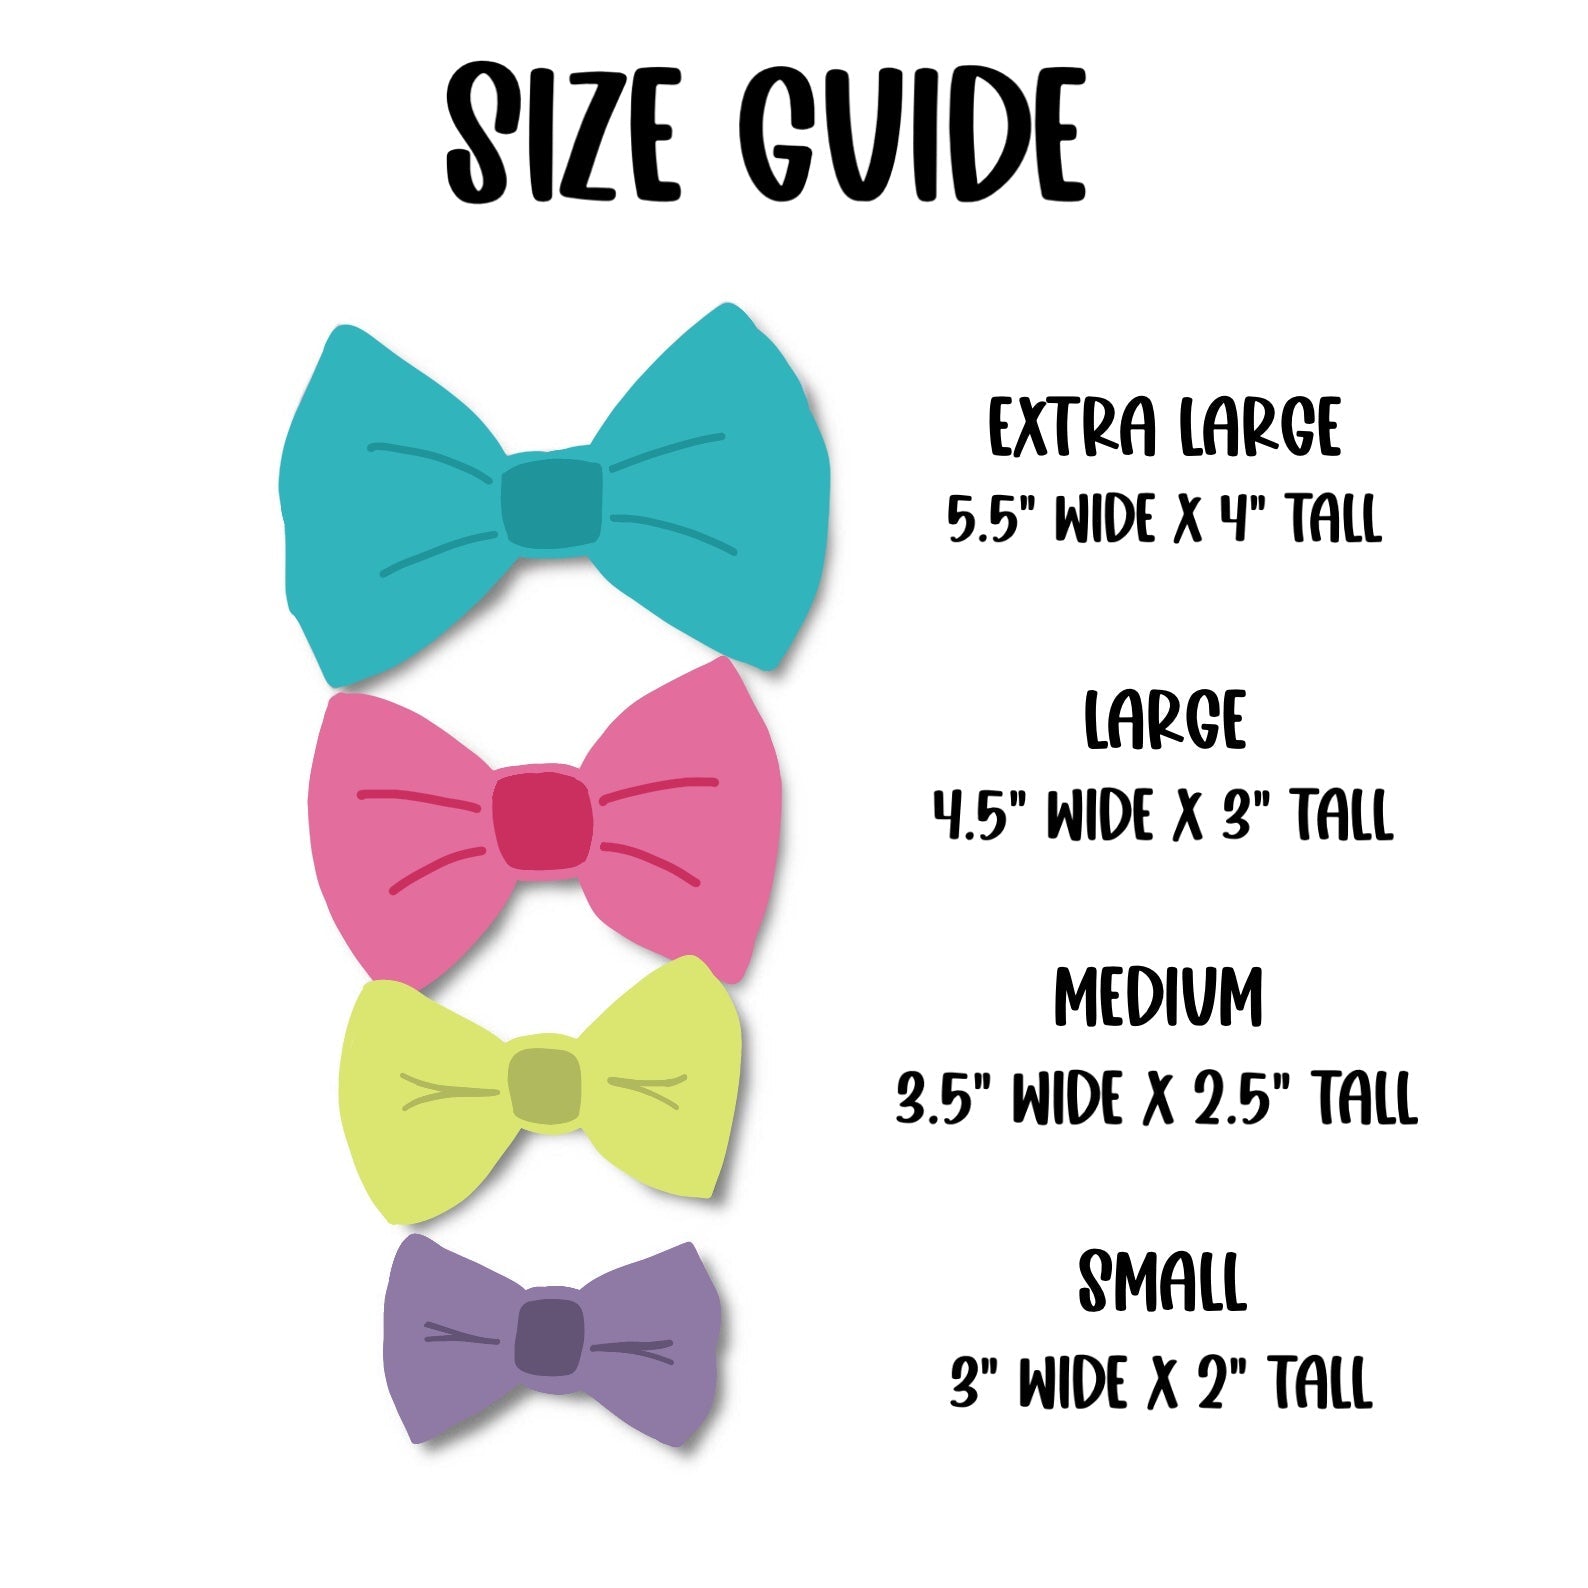 Crazy Chevron Bow - The Paw Pack Goods